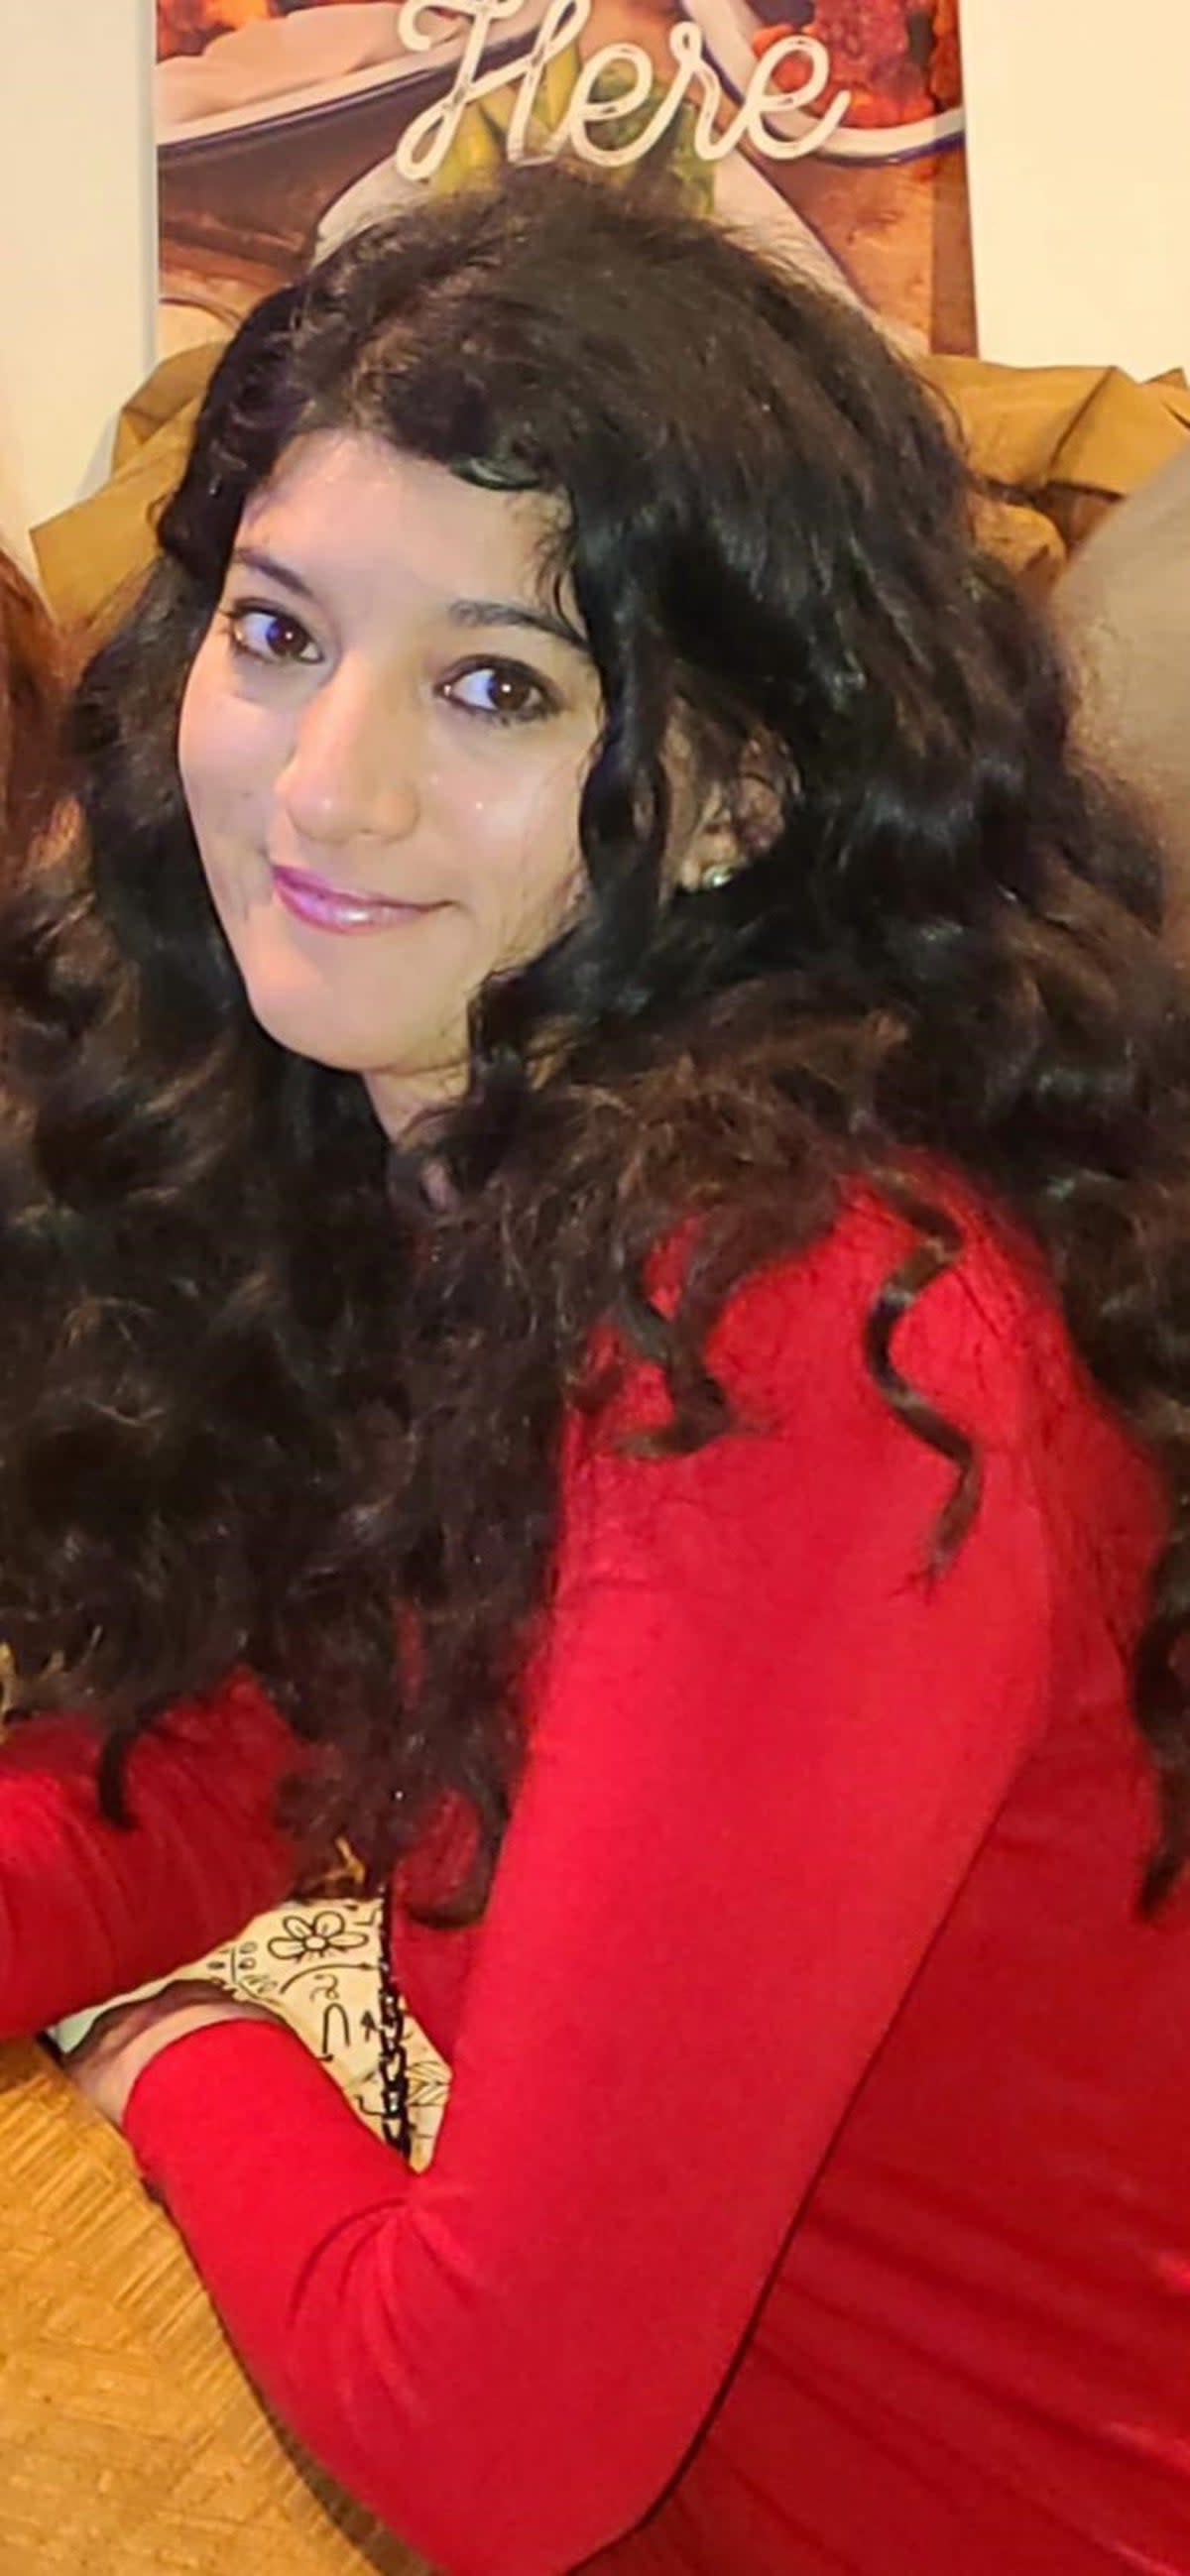 Zara Aleena was killed by a stranger as she walked home in the early hours of Sunday (Metropolitan Police/PA) (PA Media)